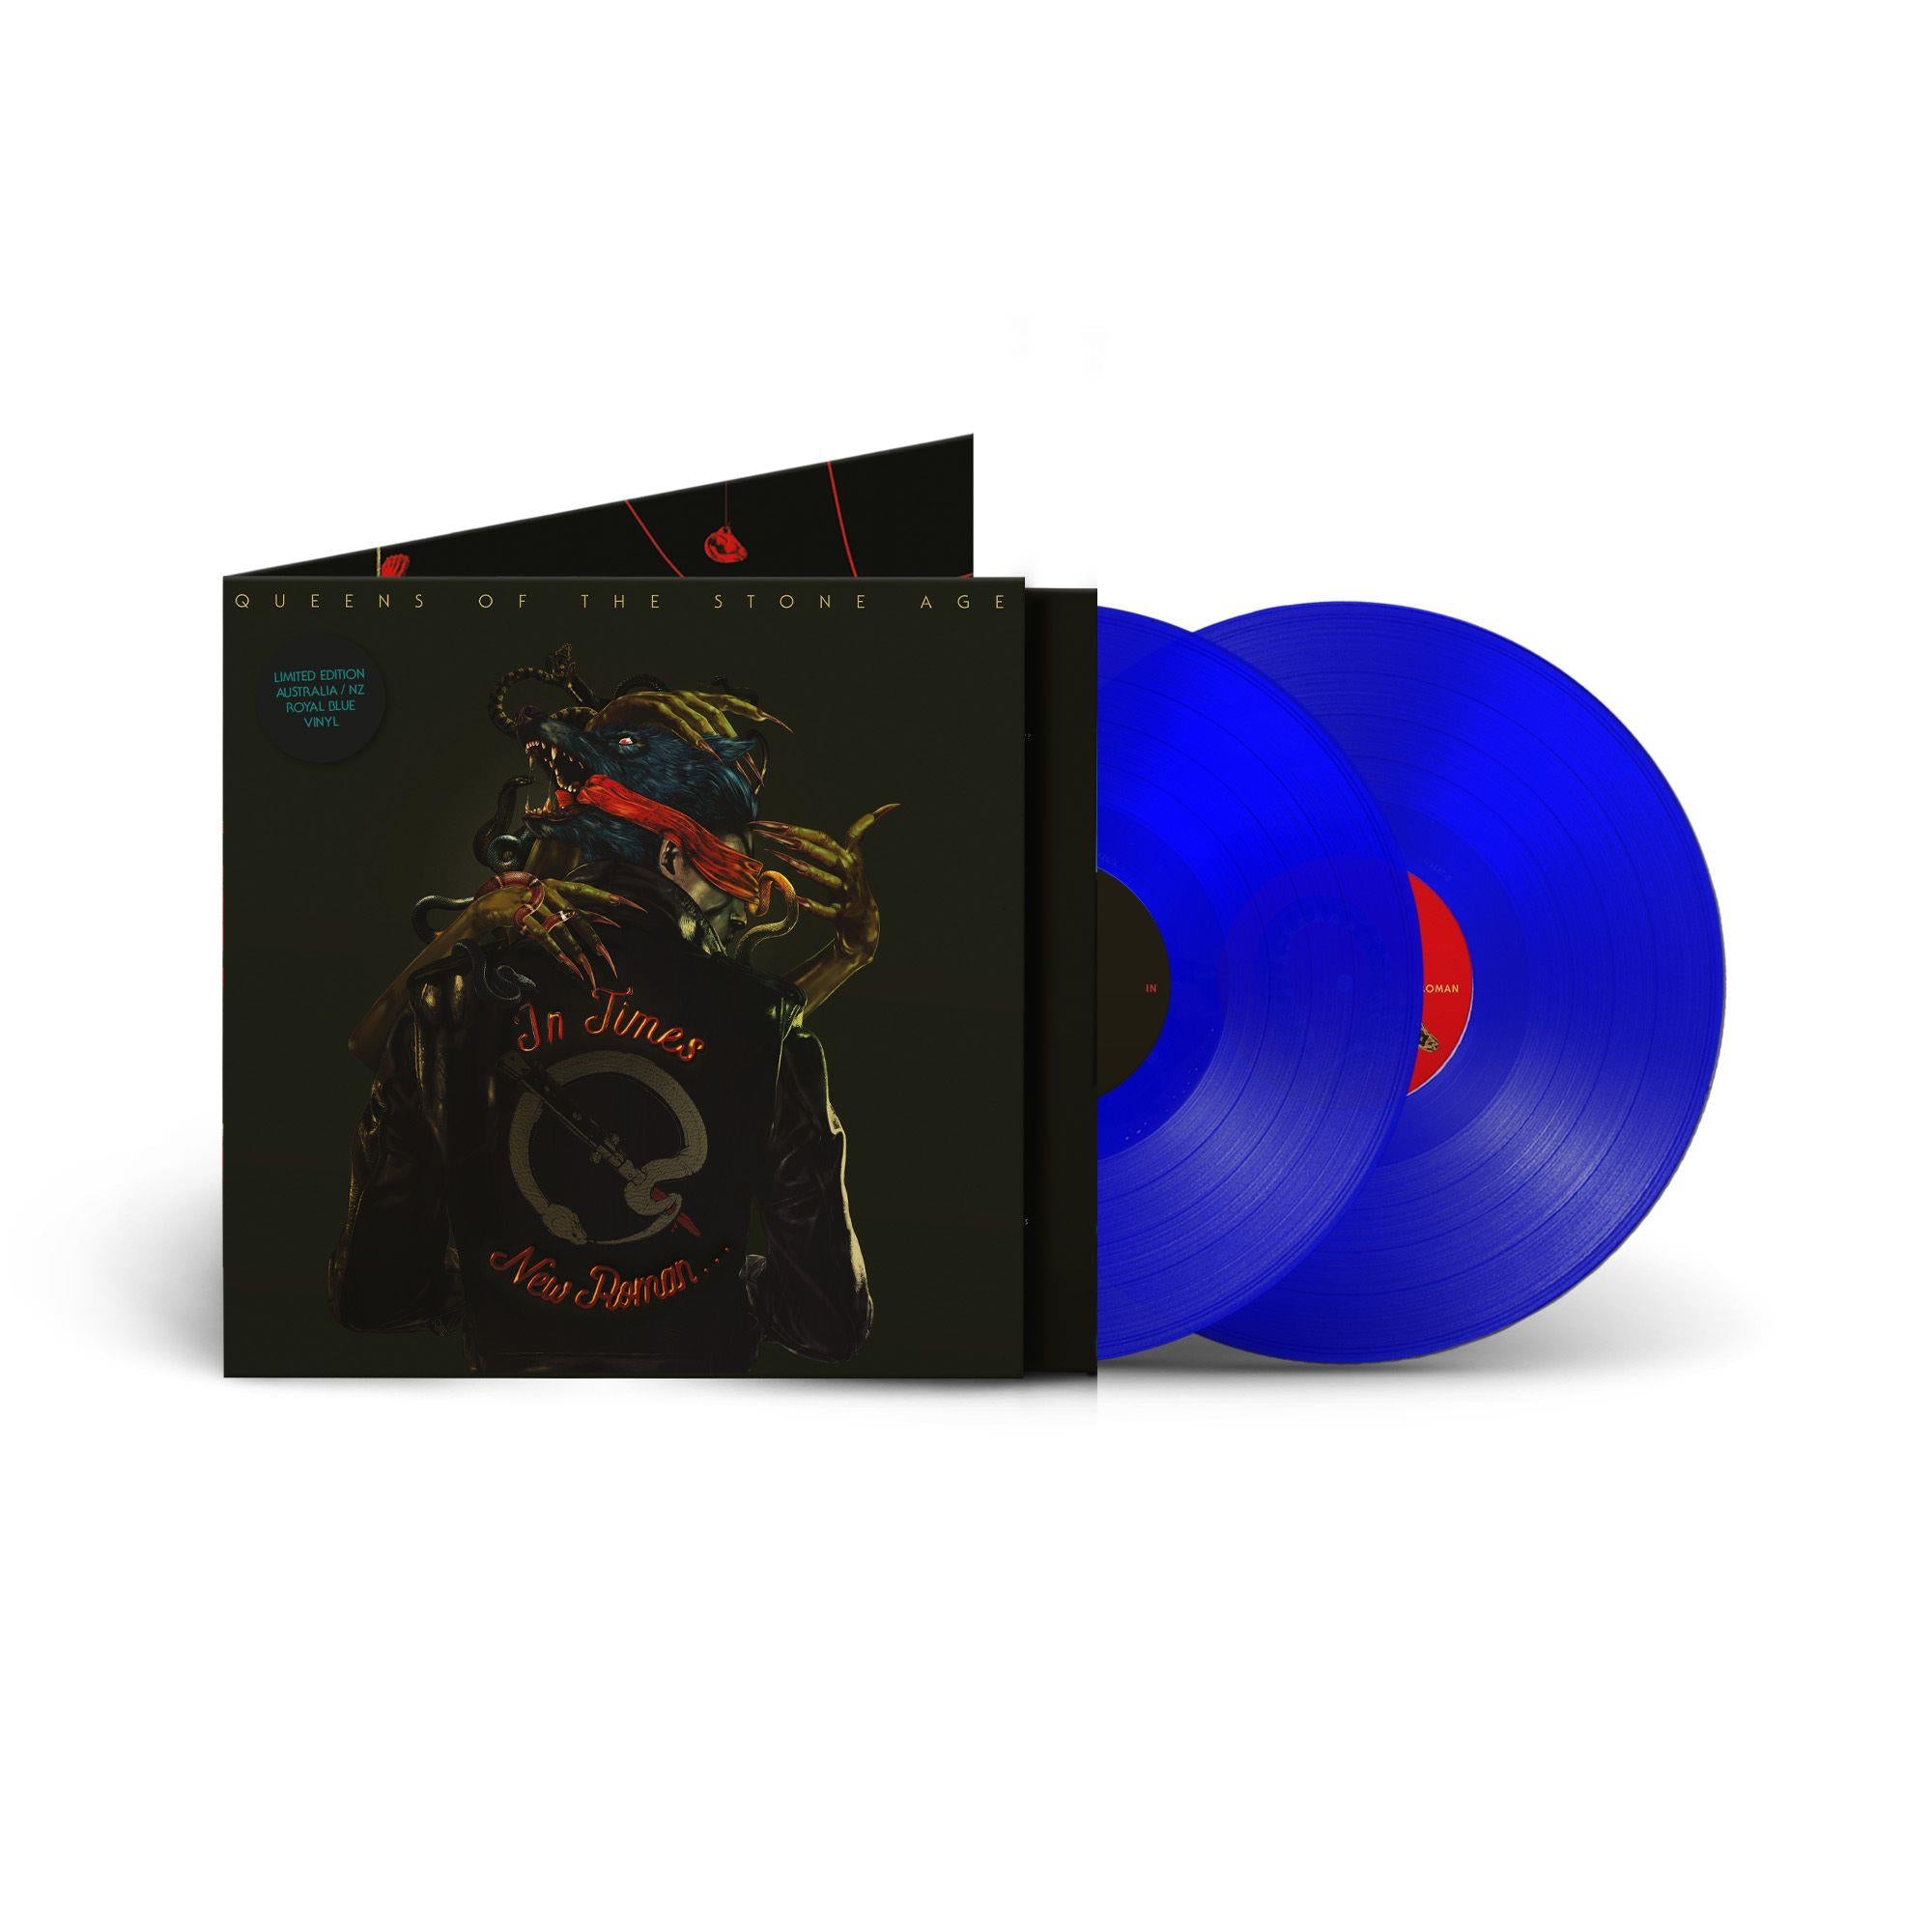 in times new roman… (limited tour edition australia/nz exclusive royal blue vinyl)